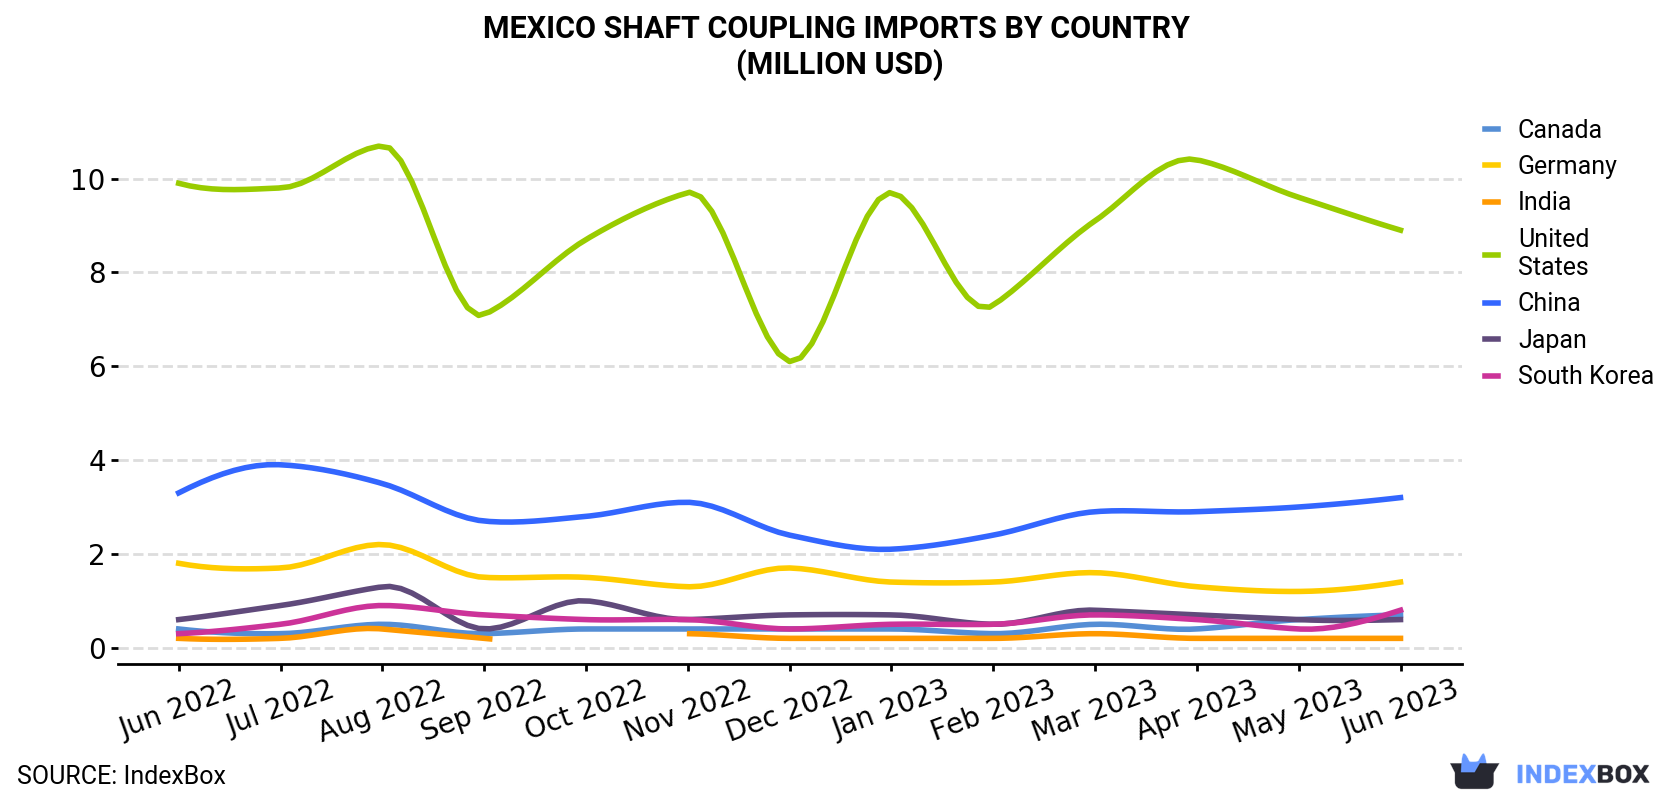 Mexico Shaft Coupling Imports By Country (Million USD)